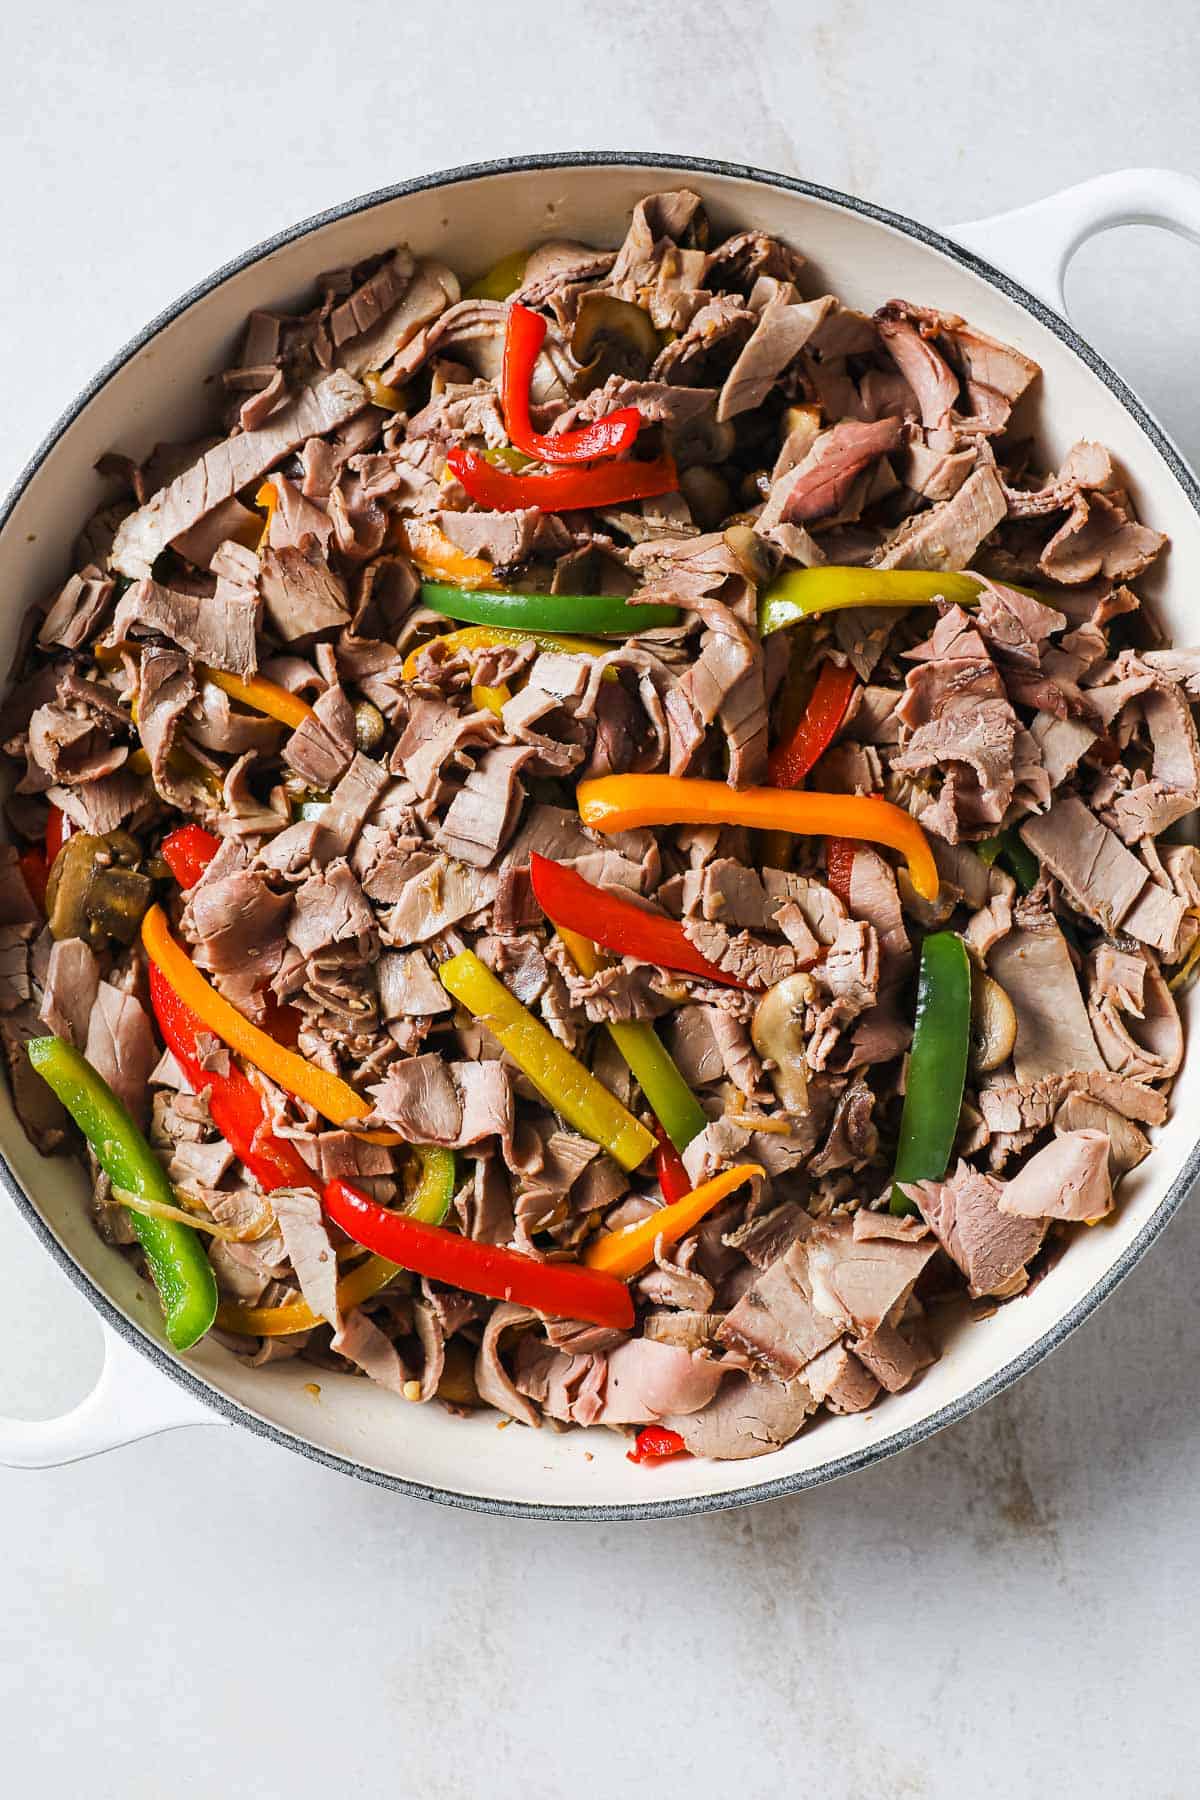 a cast iron skillet with sautéed roast beef, mushrooms, garlic, peppers, and onions